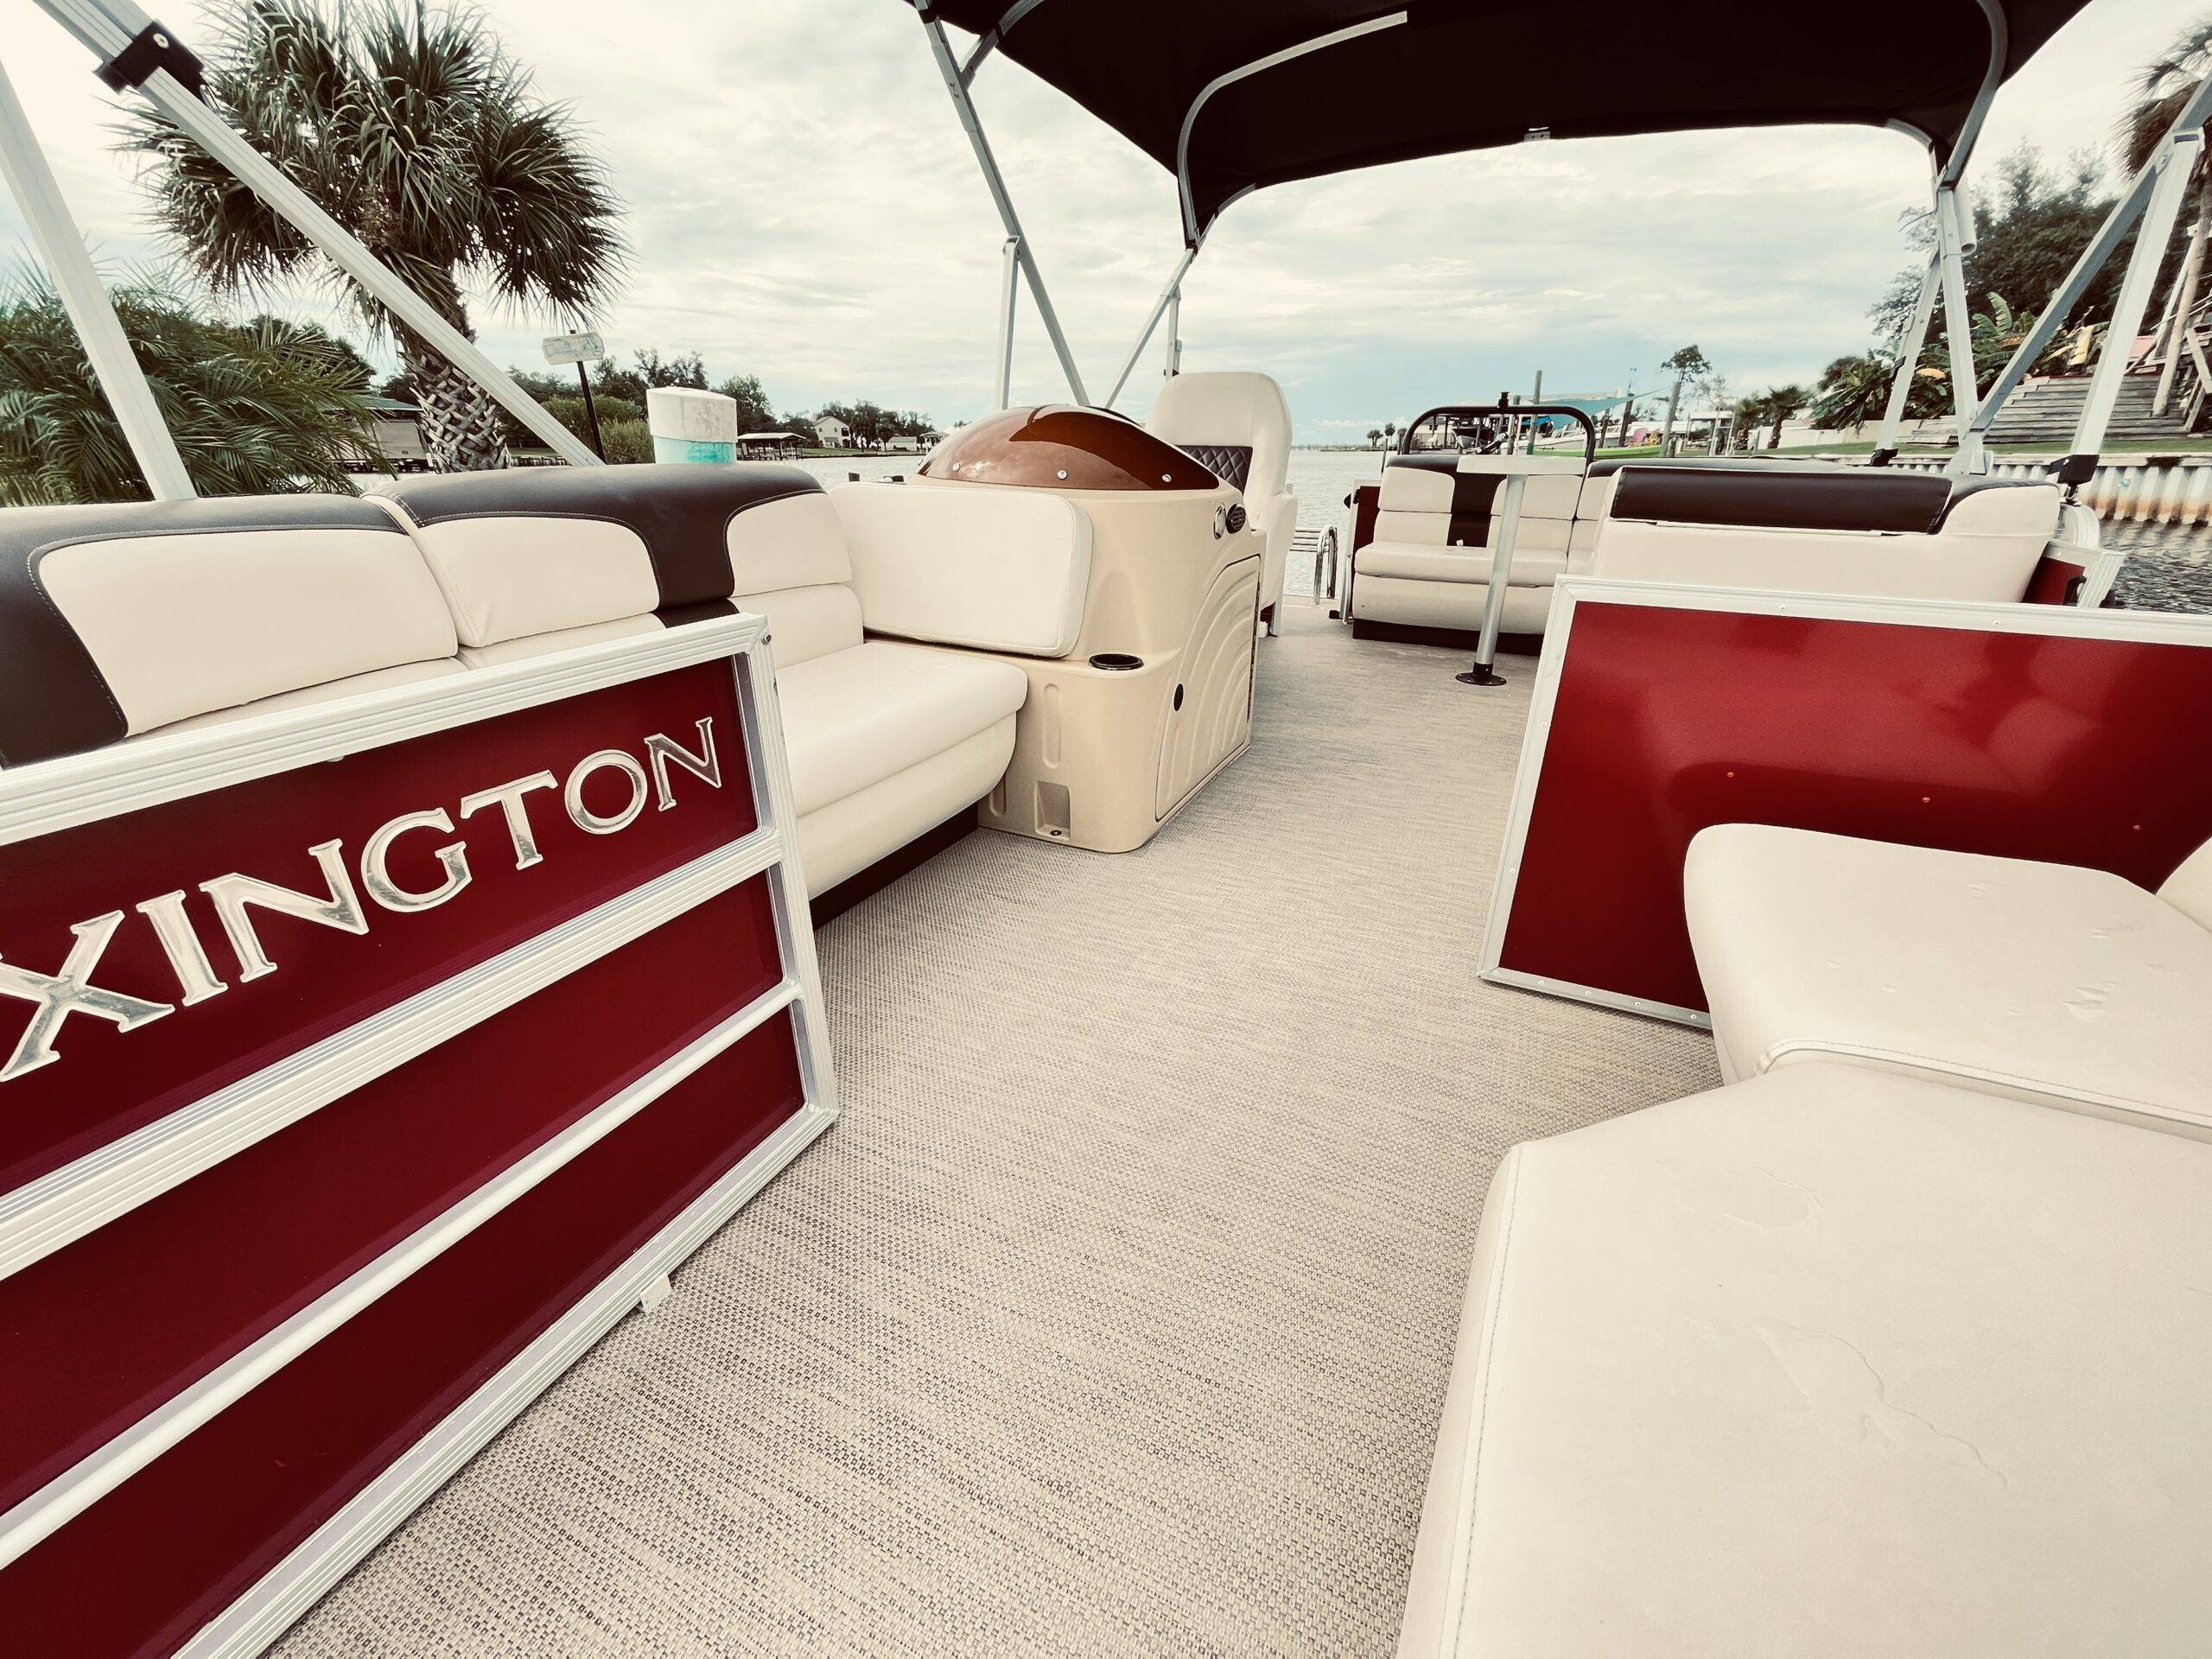 Alt text: "Hideaway Pontoon Rental's deck, red and cream seats, calm water, ready for a relaxing cruise."